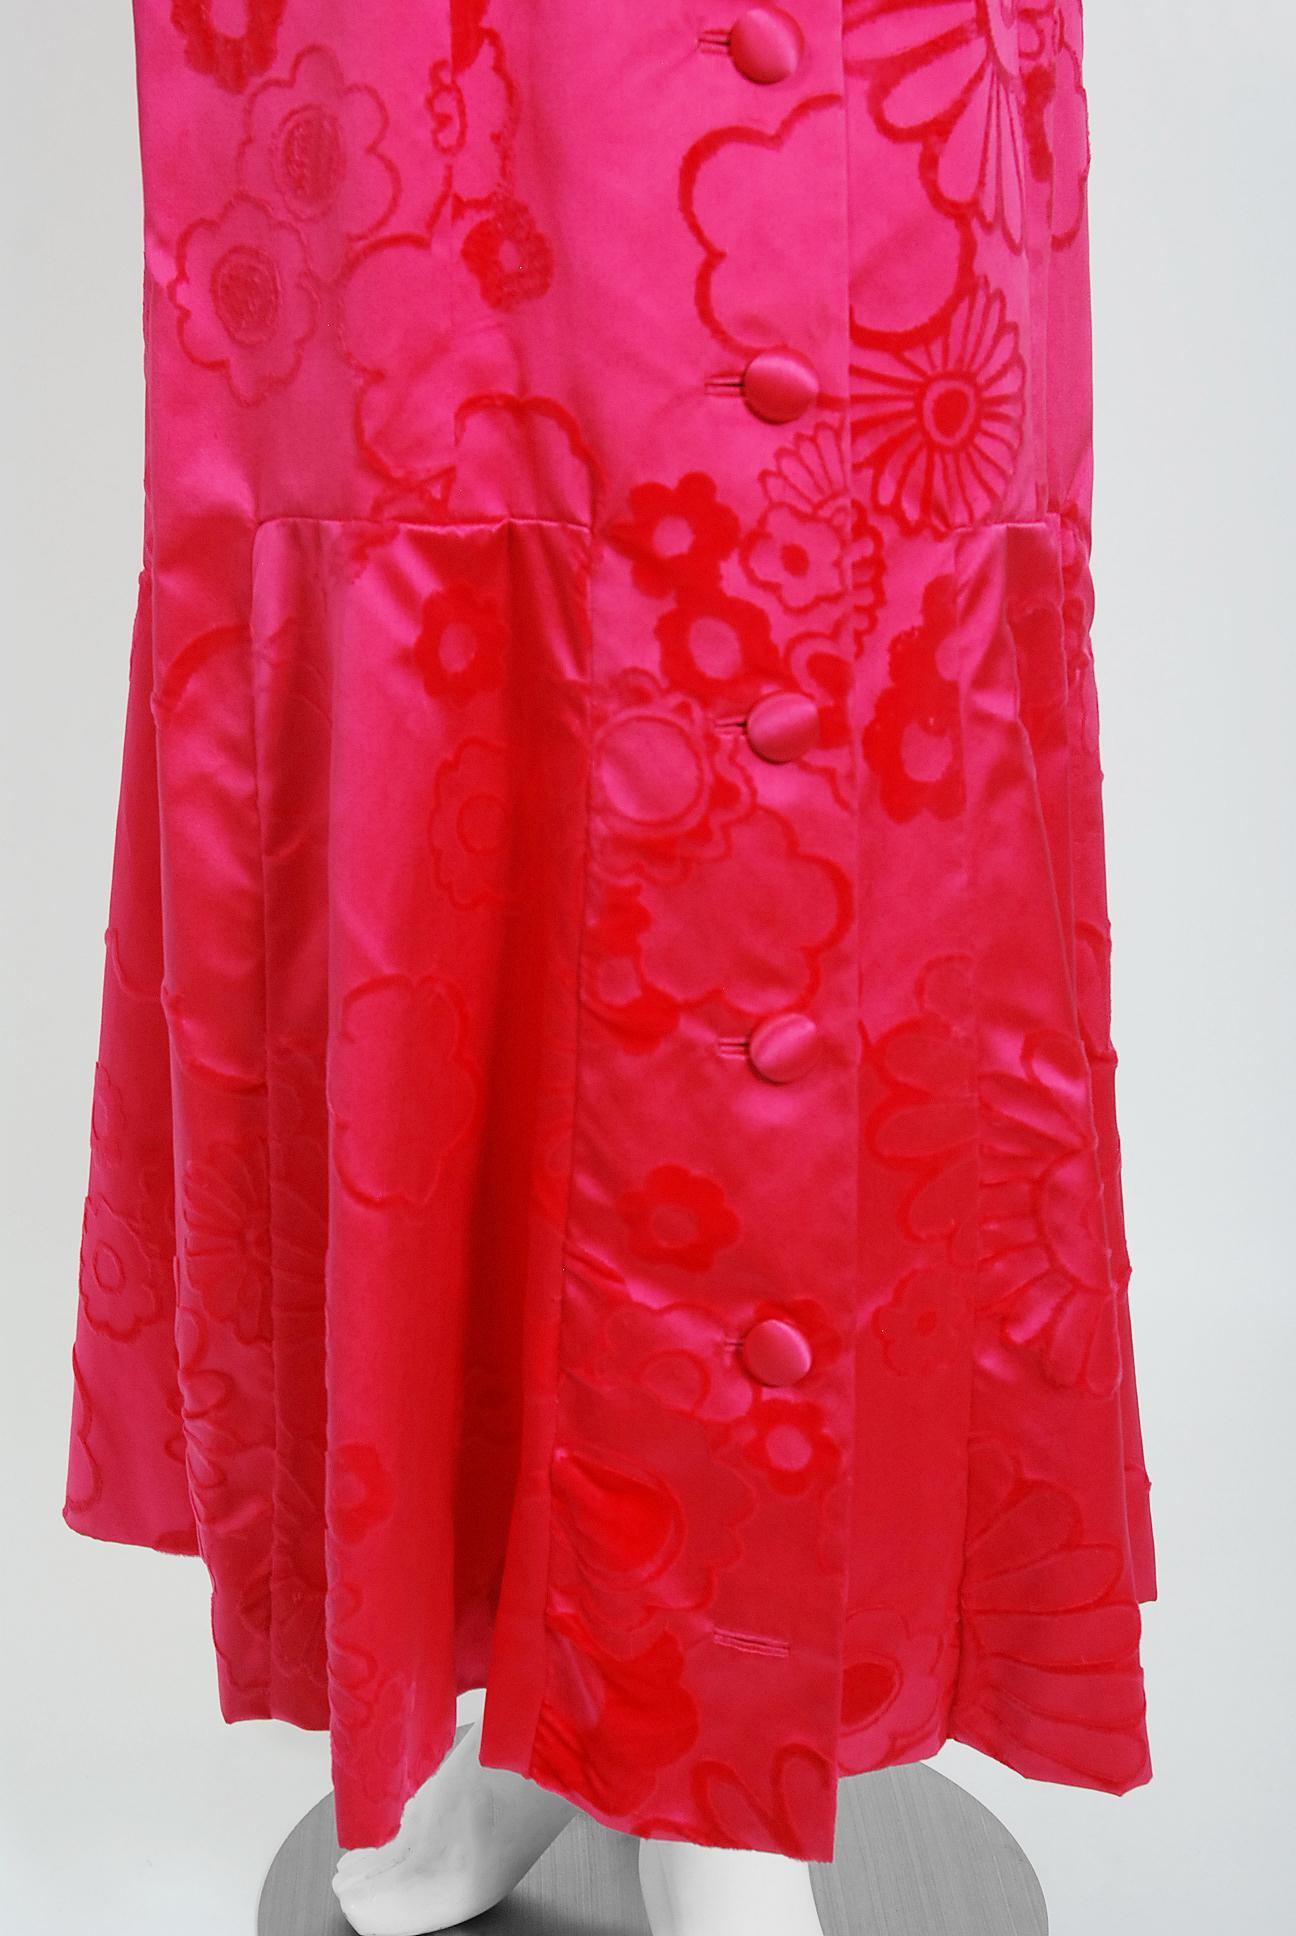 Women's Vintage 1970 Mainbocher Couture Vogue Documented Hot Pink Flocked Silk Dress For Sale